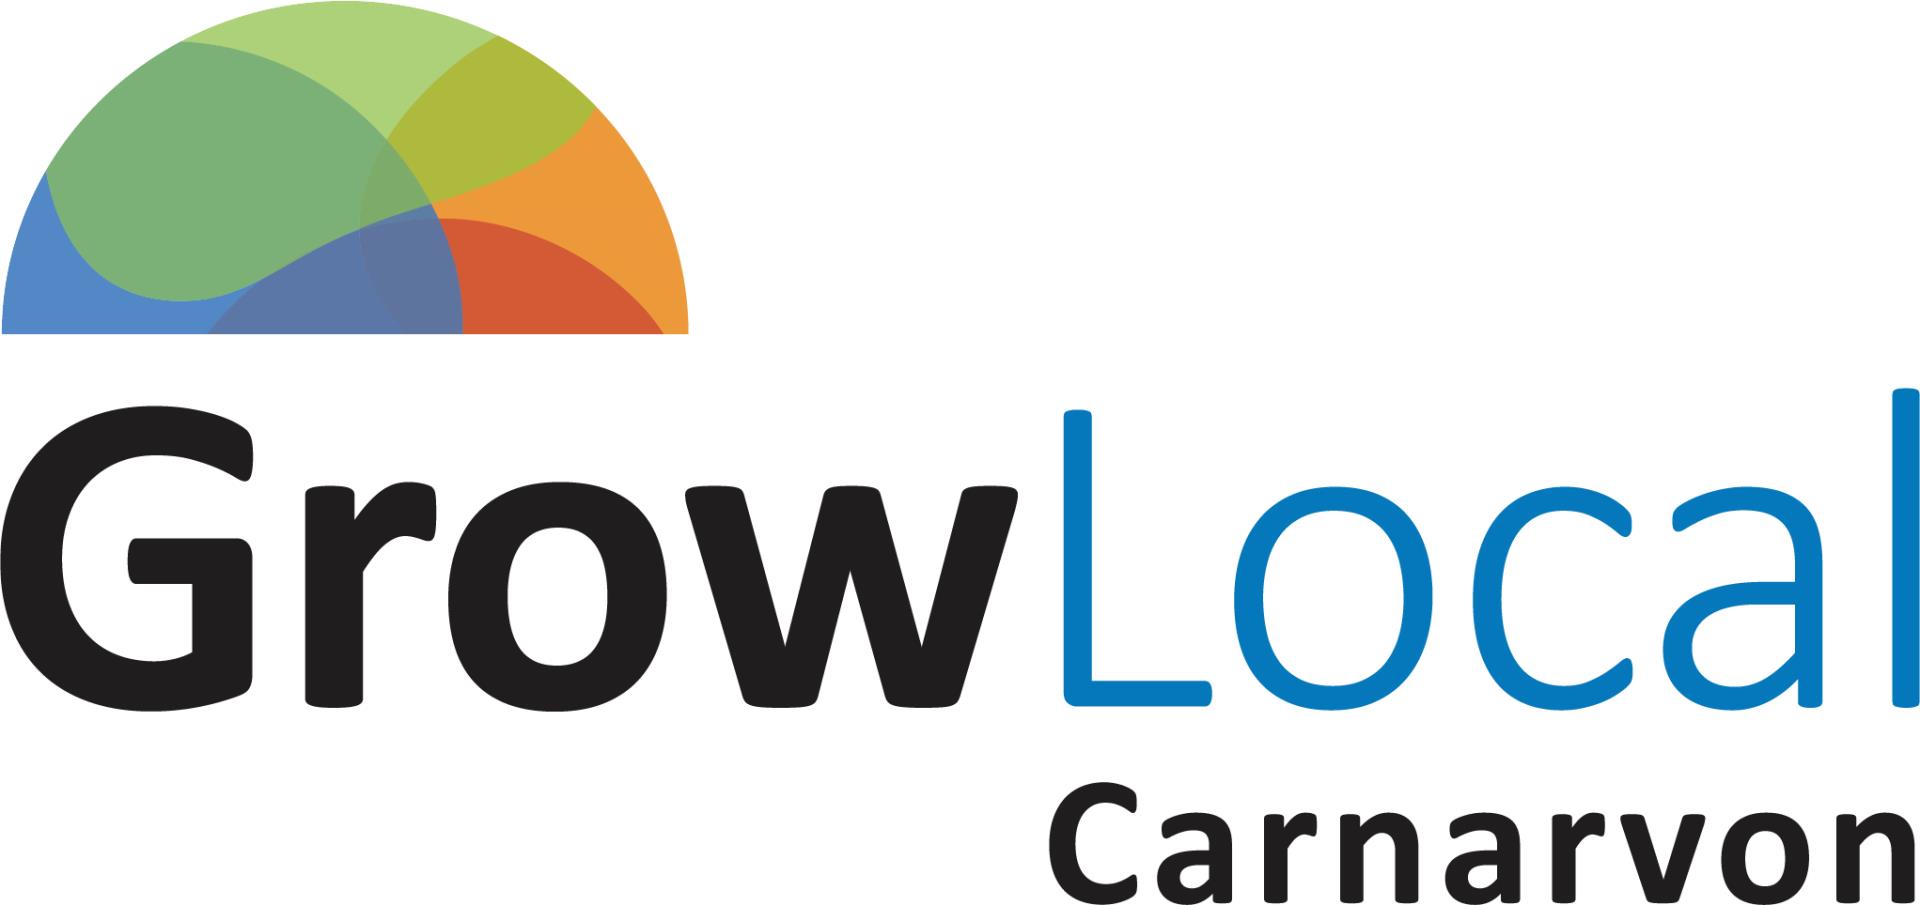 Launch of Grow Local Program aims to enhance growth in the region through